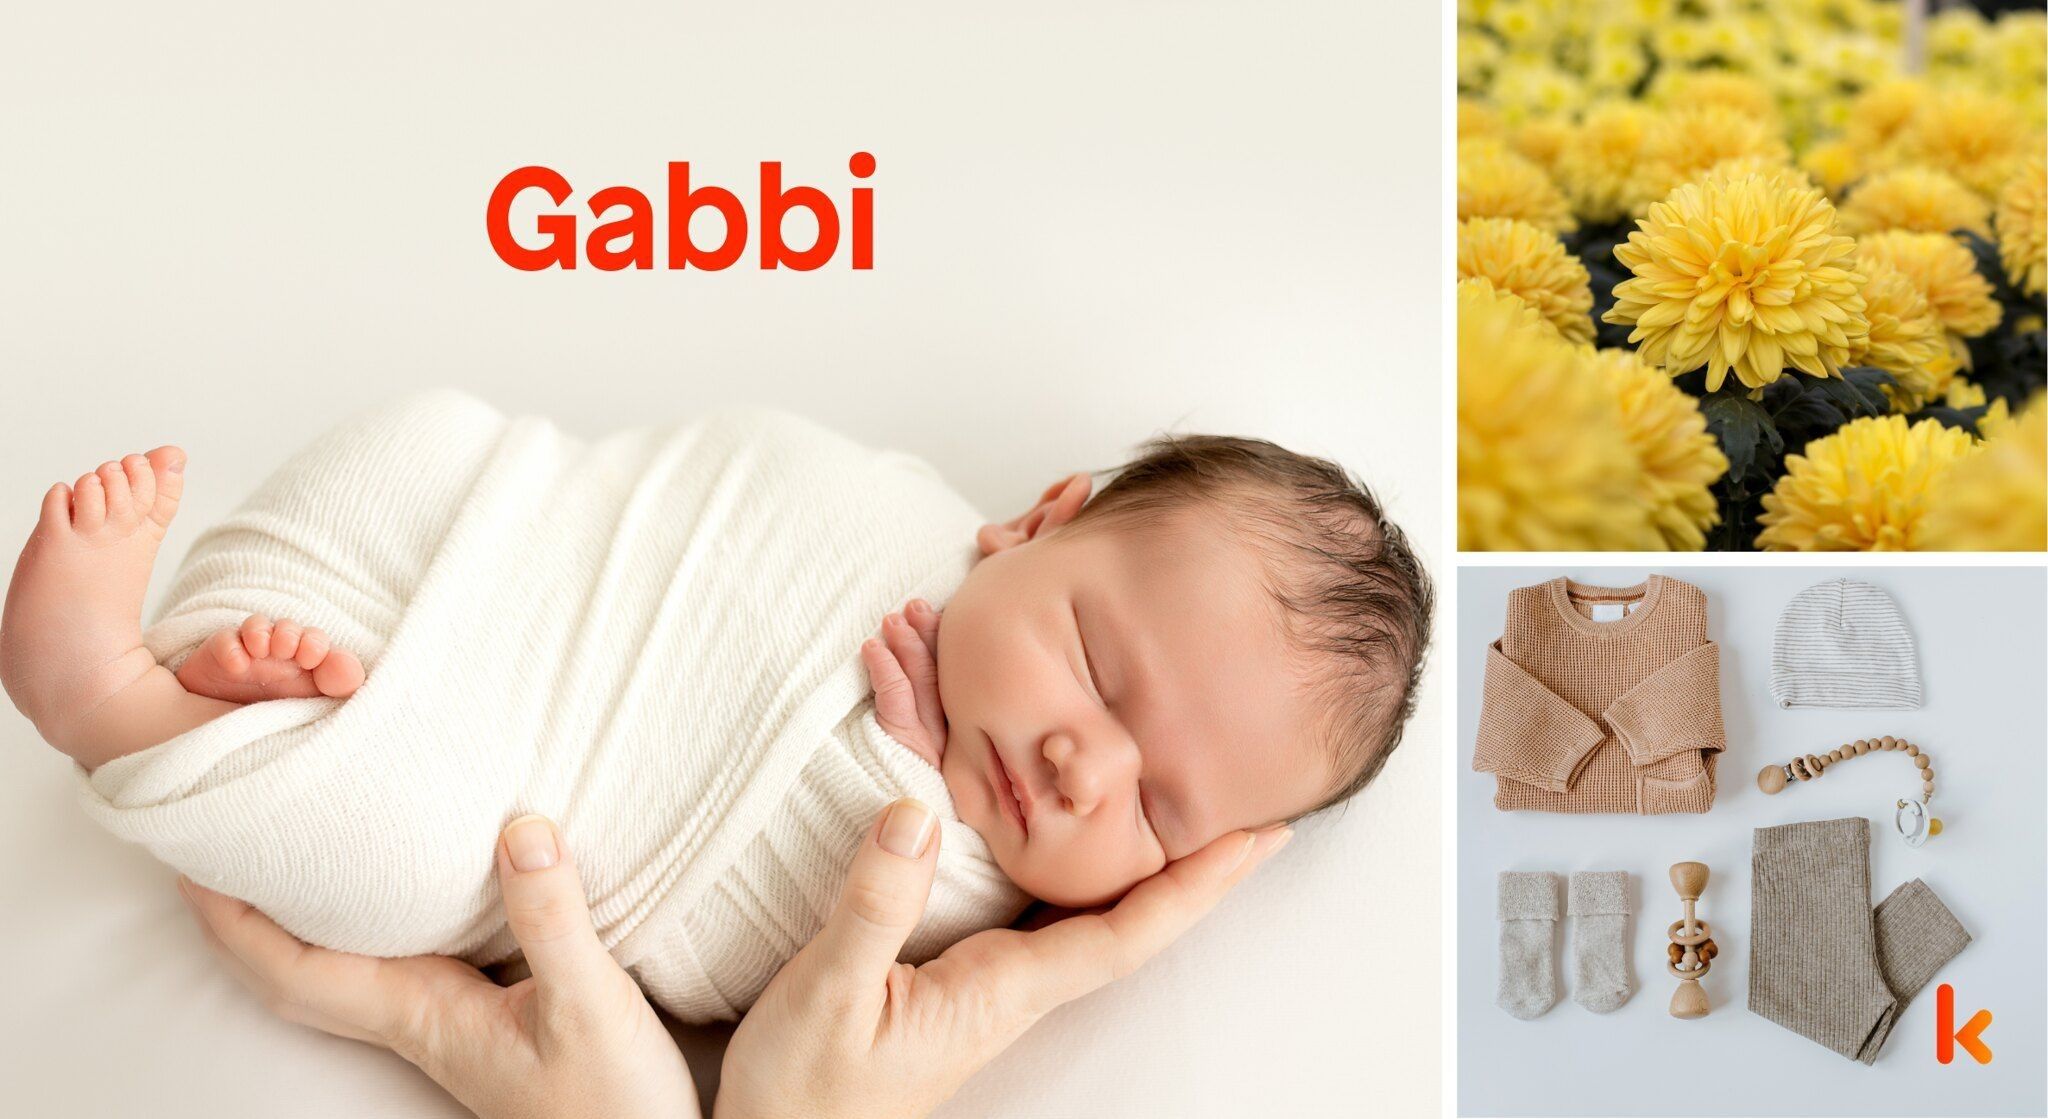 Meaning of the name Gabbi